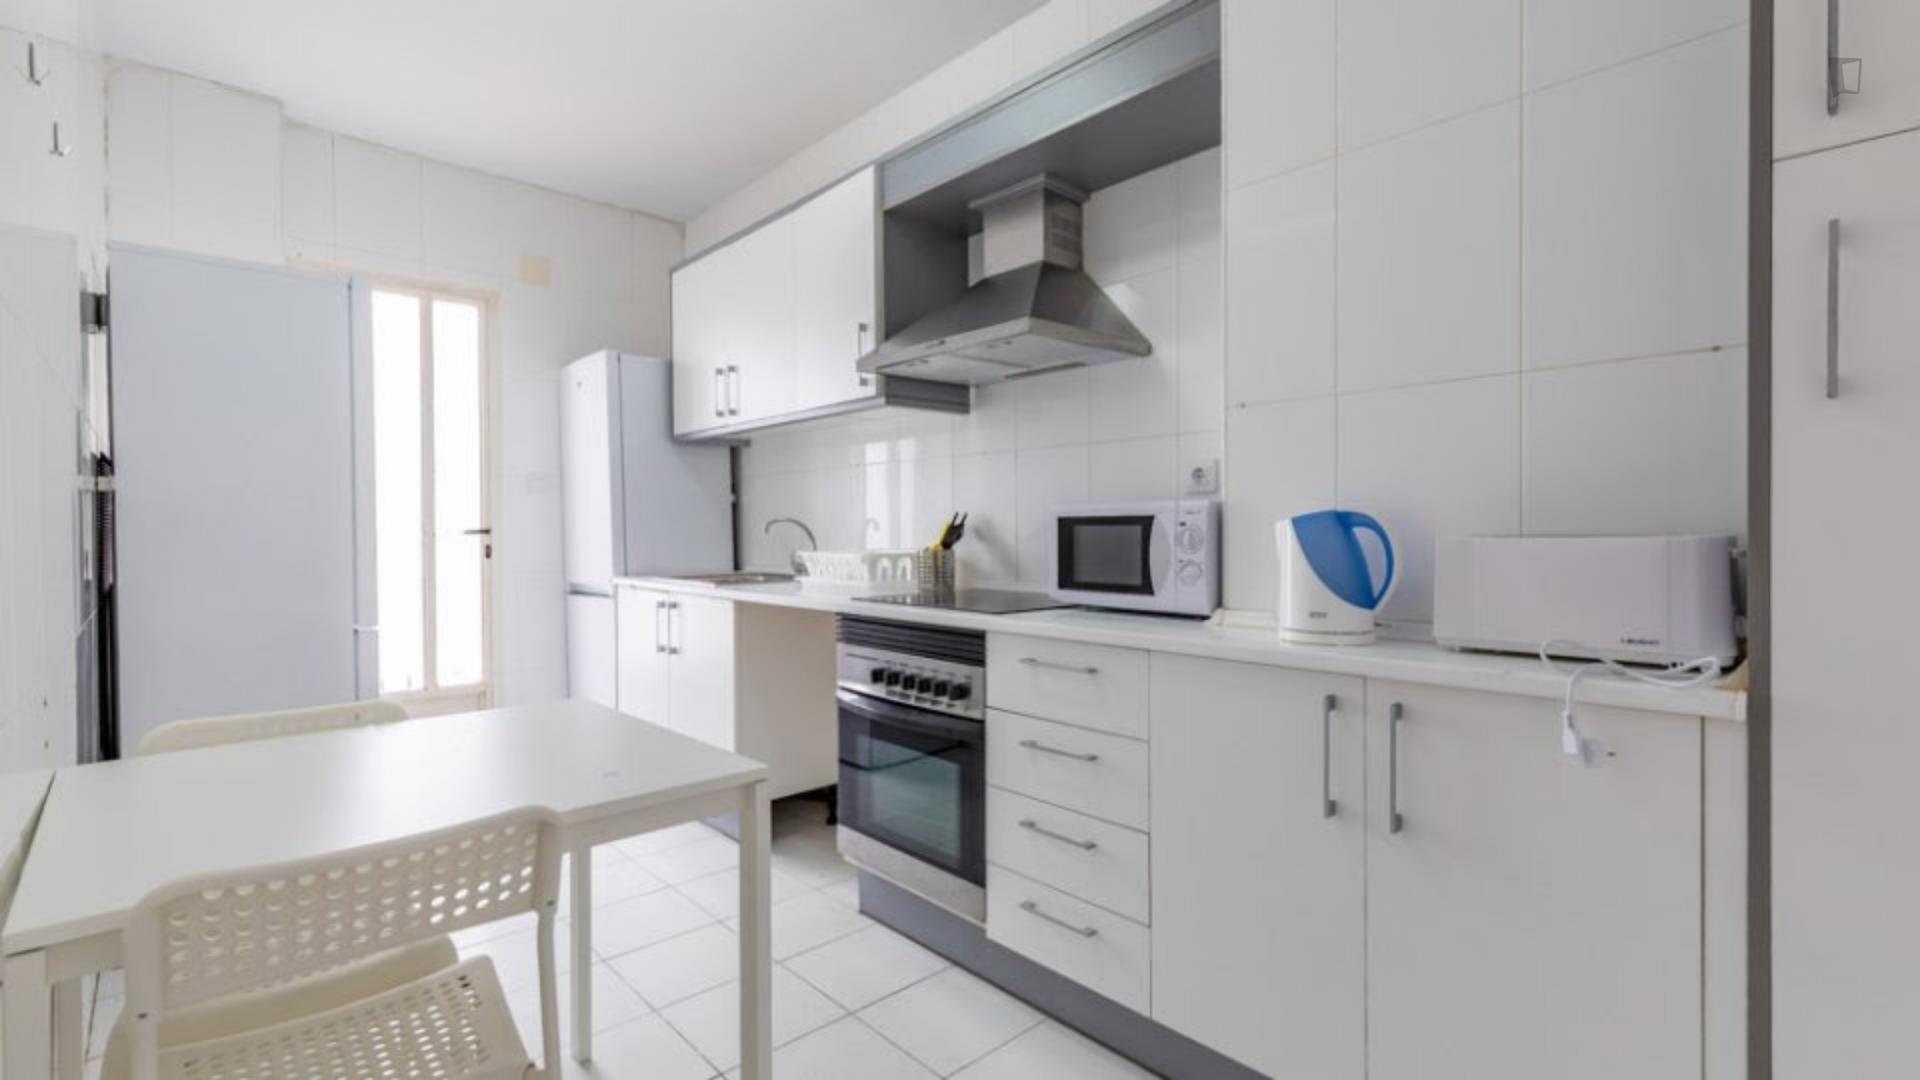 Cadarso - Furnished bedroom in Valencia for expats